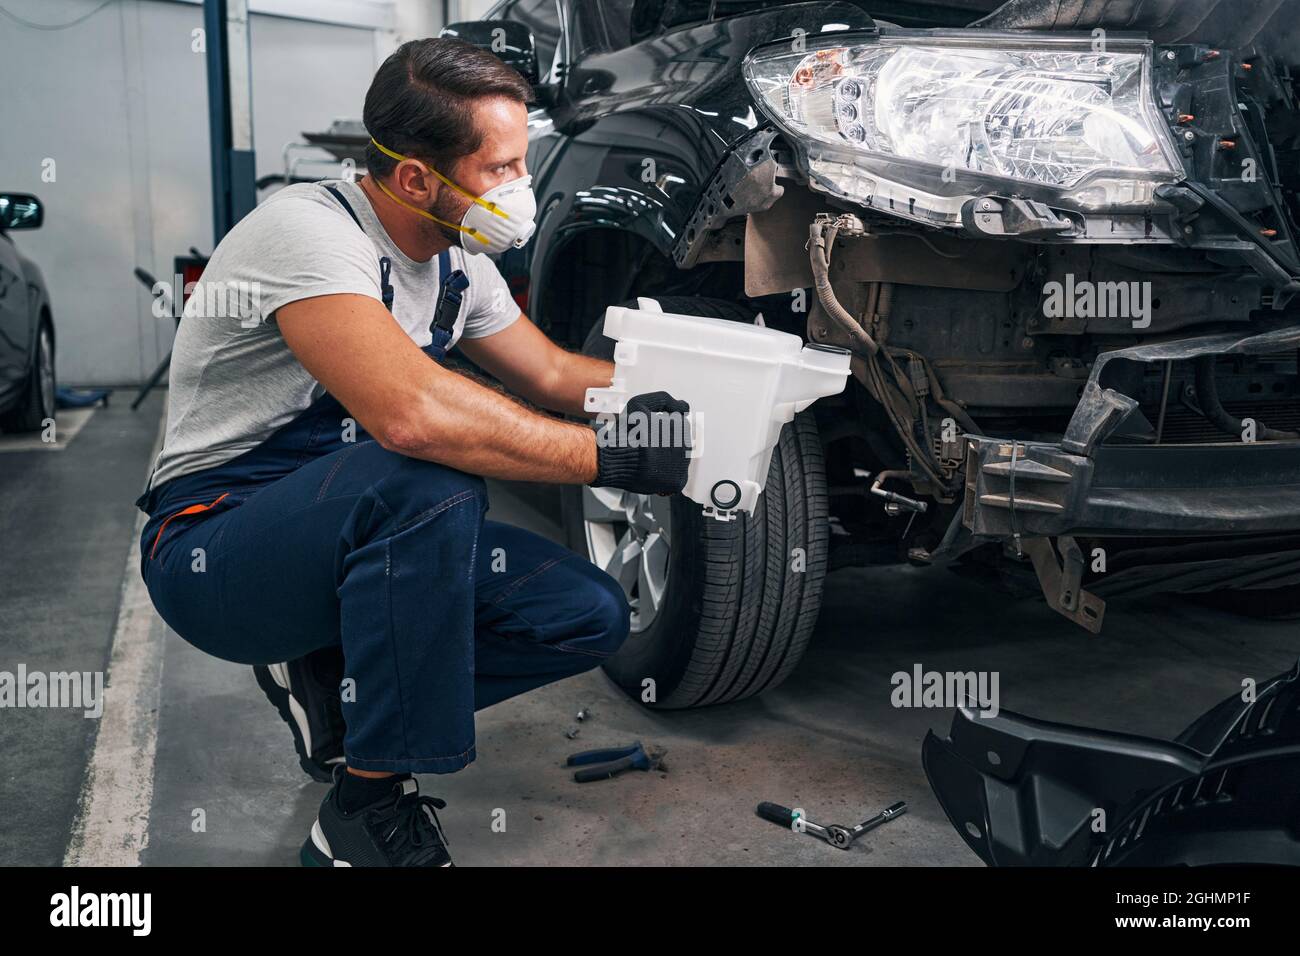 Mechanic is removing washer reservoir from car Stock Photo